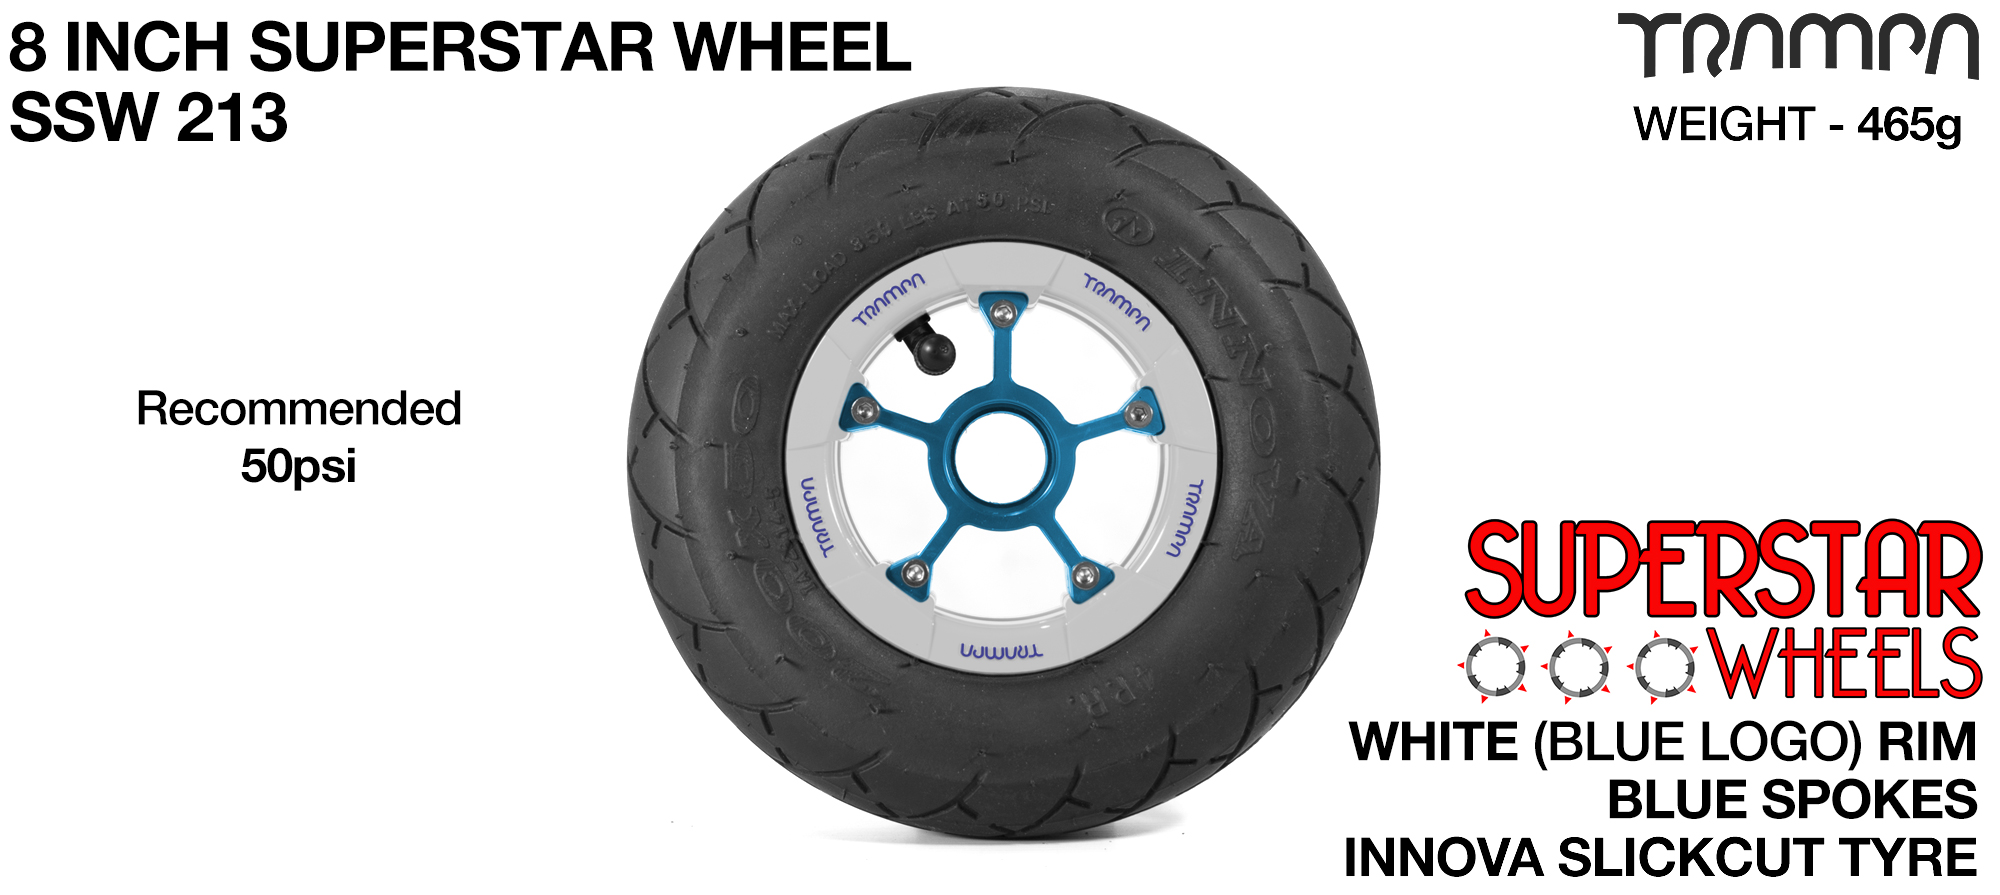 Superstar 8 inch wheels - Gloss White Superstar Rim with Blue Anodised spokes & Black SLICK cut 8 inch Tyre